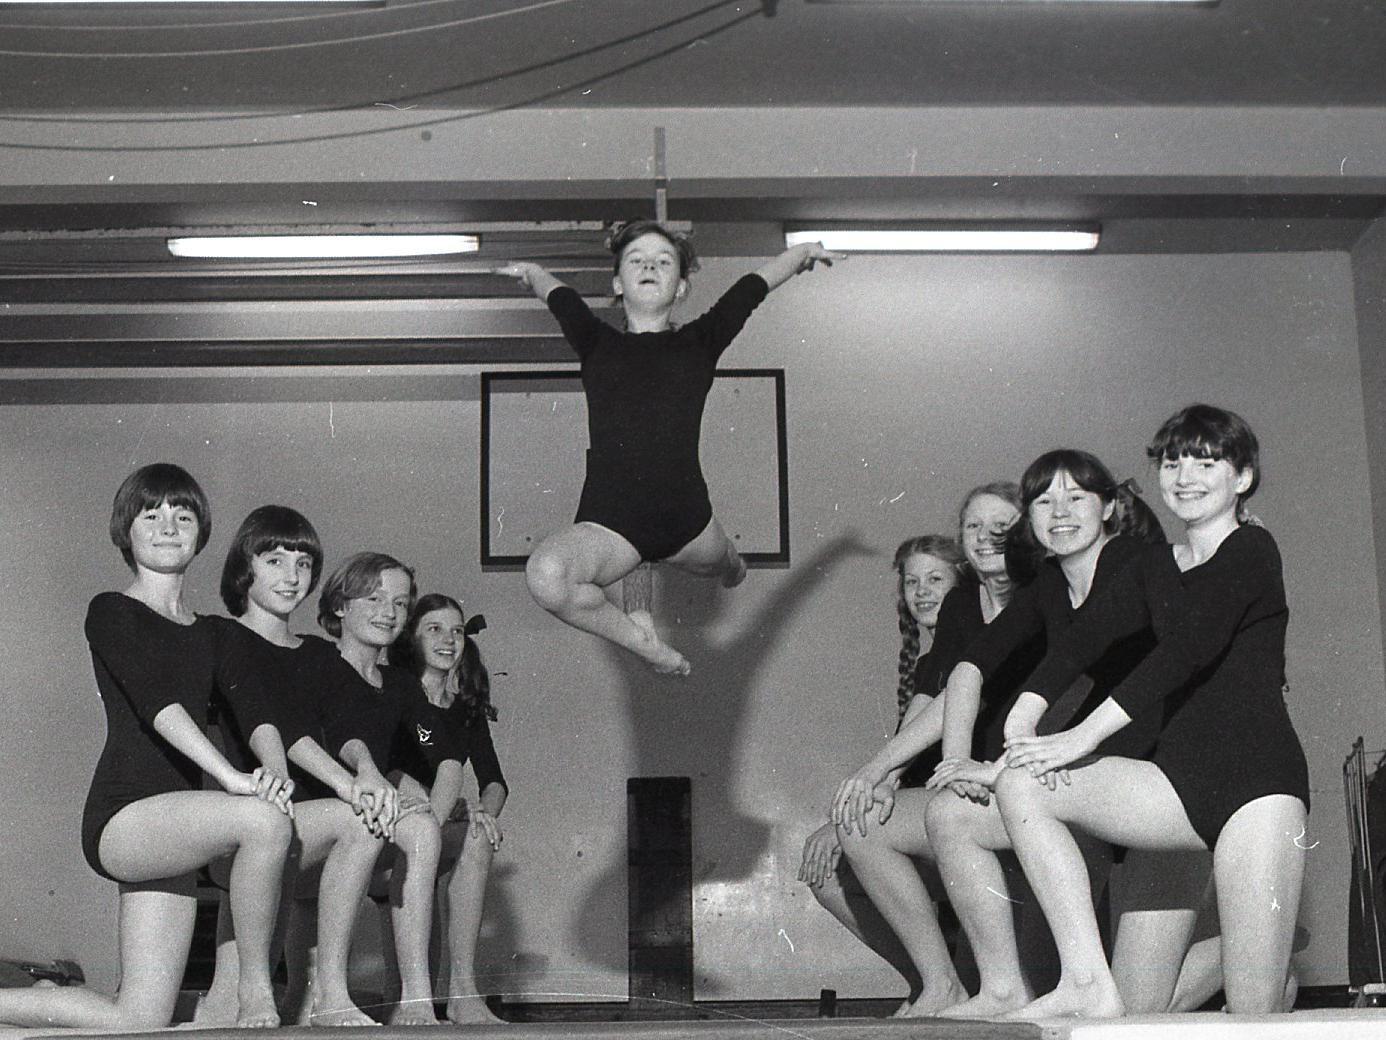 The Winckley Square Convent gymnastics teams. Left, the junior team (left to right): Alison Scott, Sharon Murphy, Nicola Rigby, Alison Bevan. Centre is junior team member Felicity Carroll. Right, the senior team (left to right): Annette Davis, Bernadette Booth, Debra Whalley and Pamela Creeley